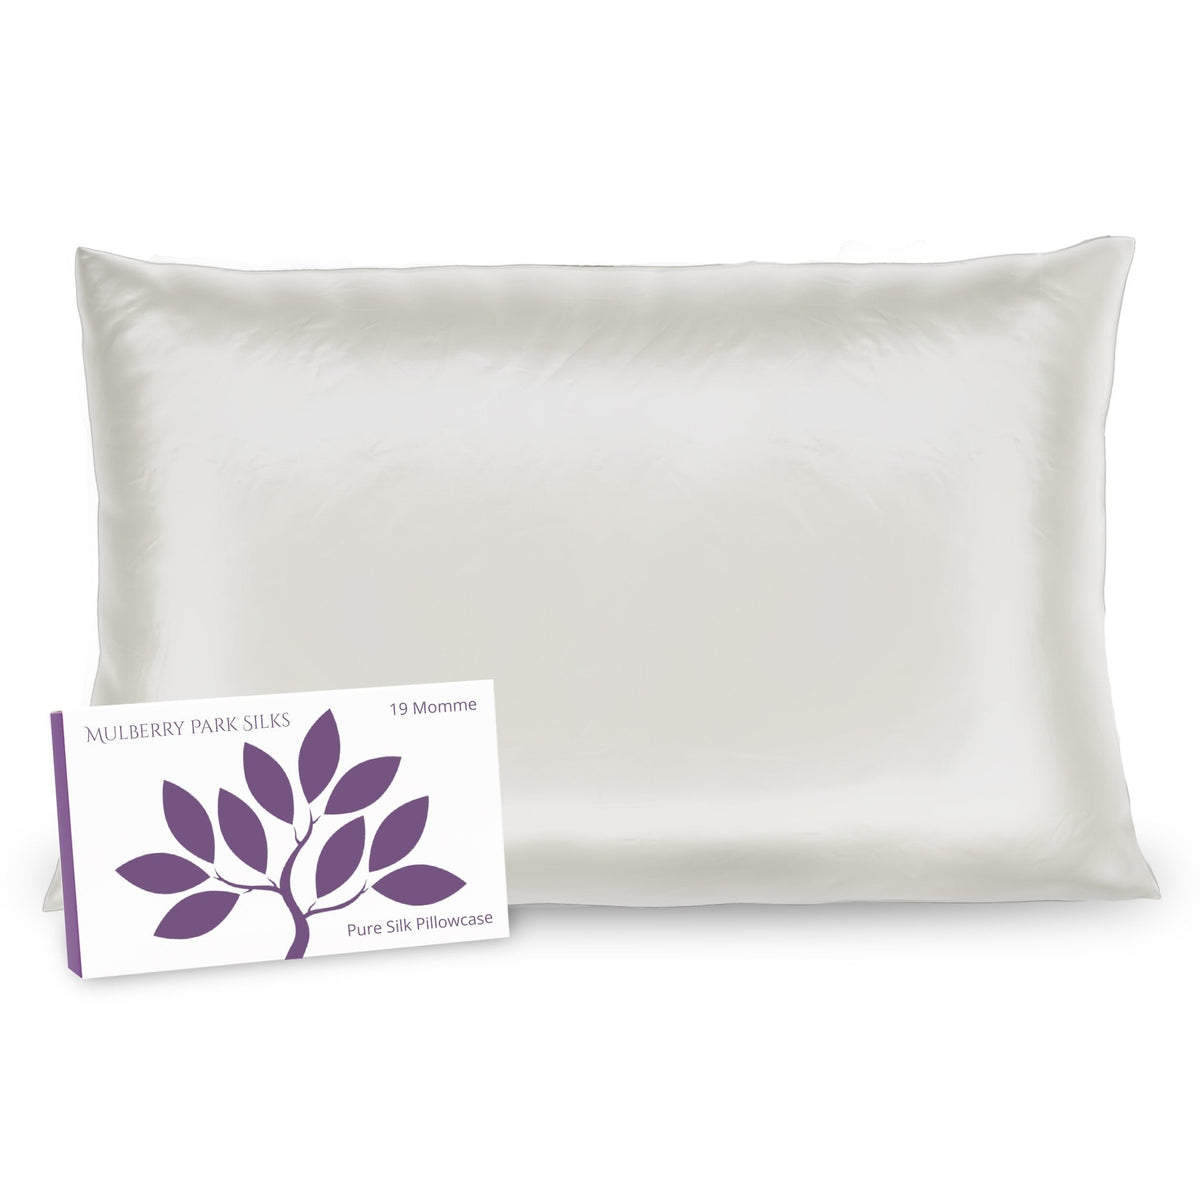 Hidden Zipper of Mulberry Park Silks Deluxe 19 Momme Pure Silk Pillowcase in Ivory Color